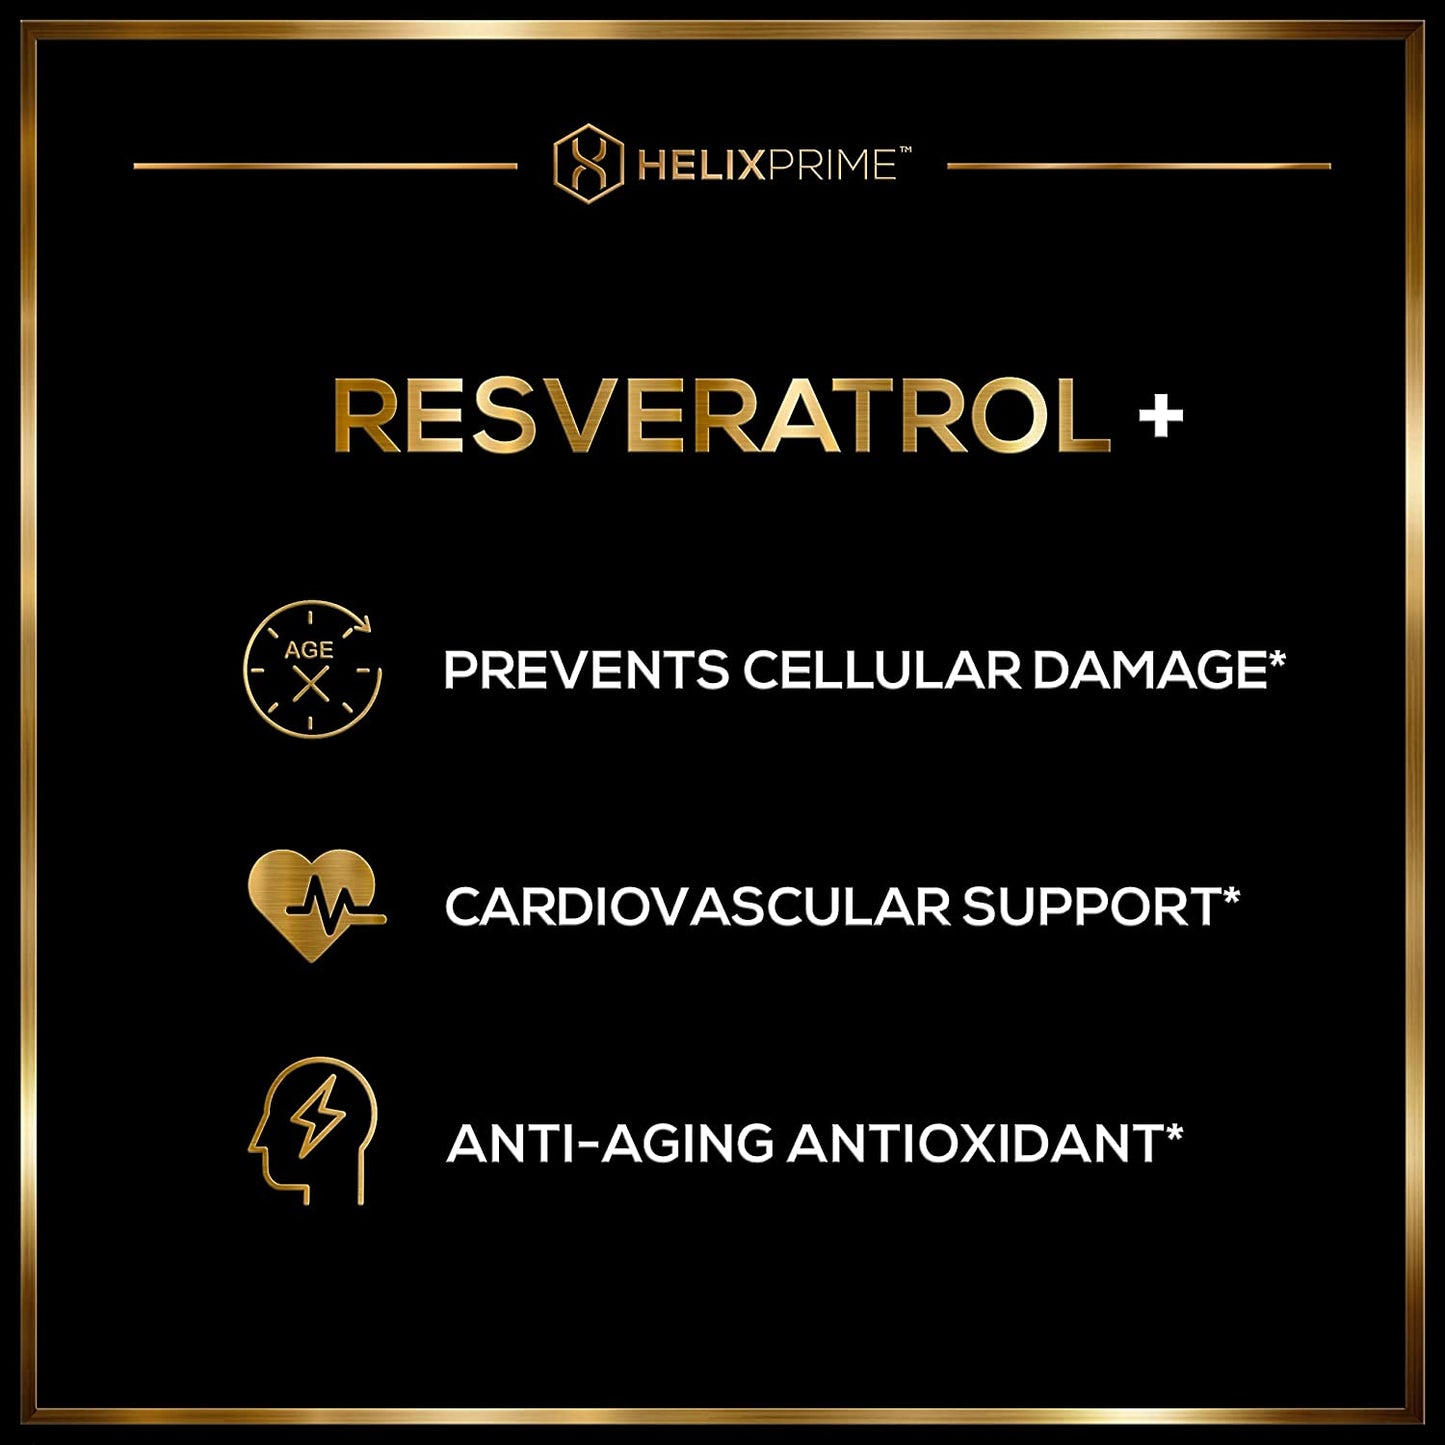 HELIX PRIME Resveratrol Promotes Anti Aging (Made in USA, 60 Capsules)